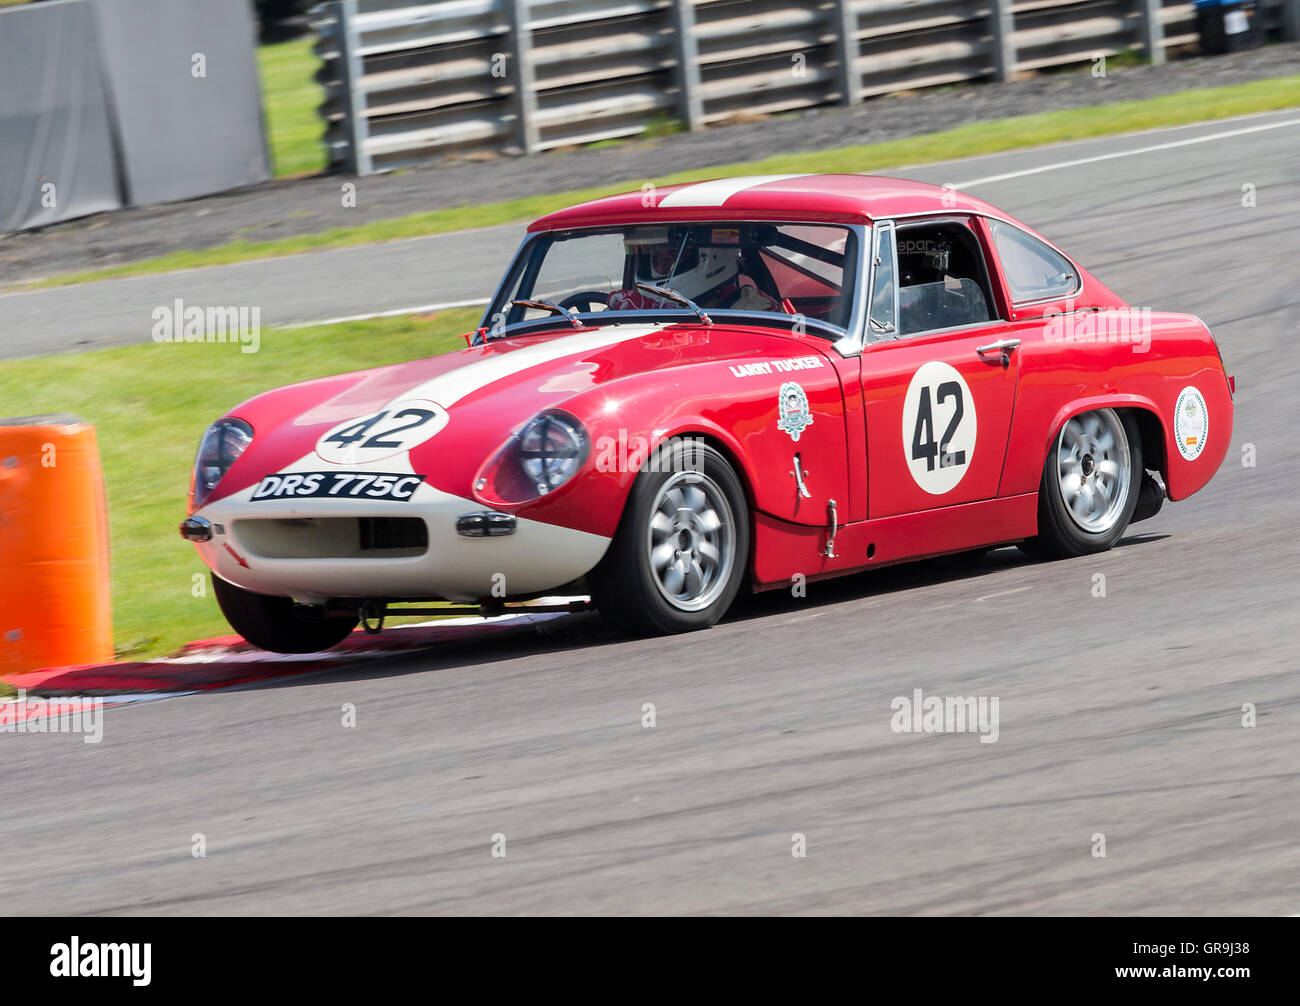 A Historic MG MIdget Sports Car Racing at Oulton Park in the Gold Cup Meeting near Tarporley Cheshire England United Kingdom UK Stock Photo